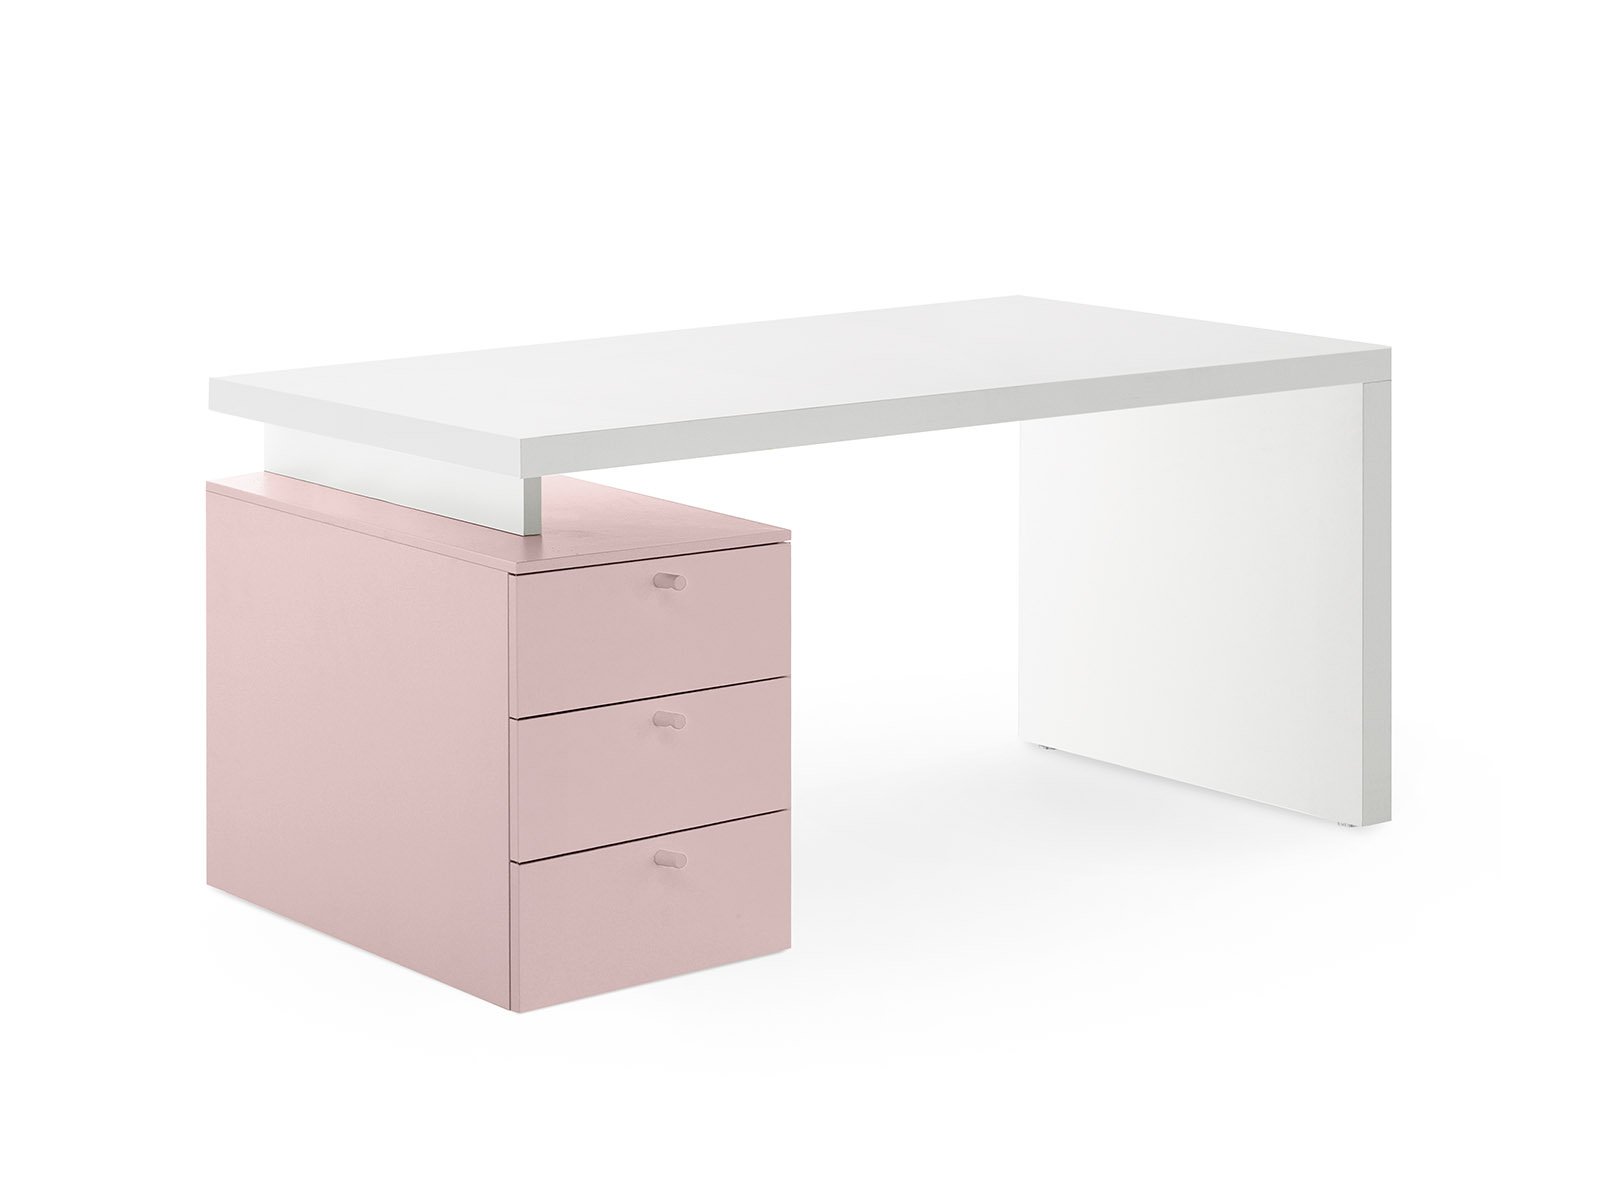 Desk with drawer unit